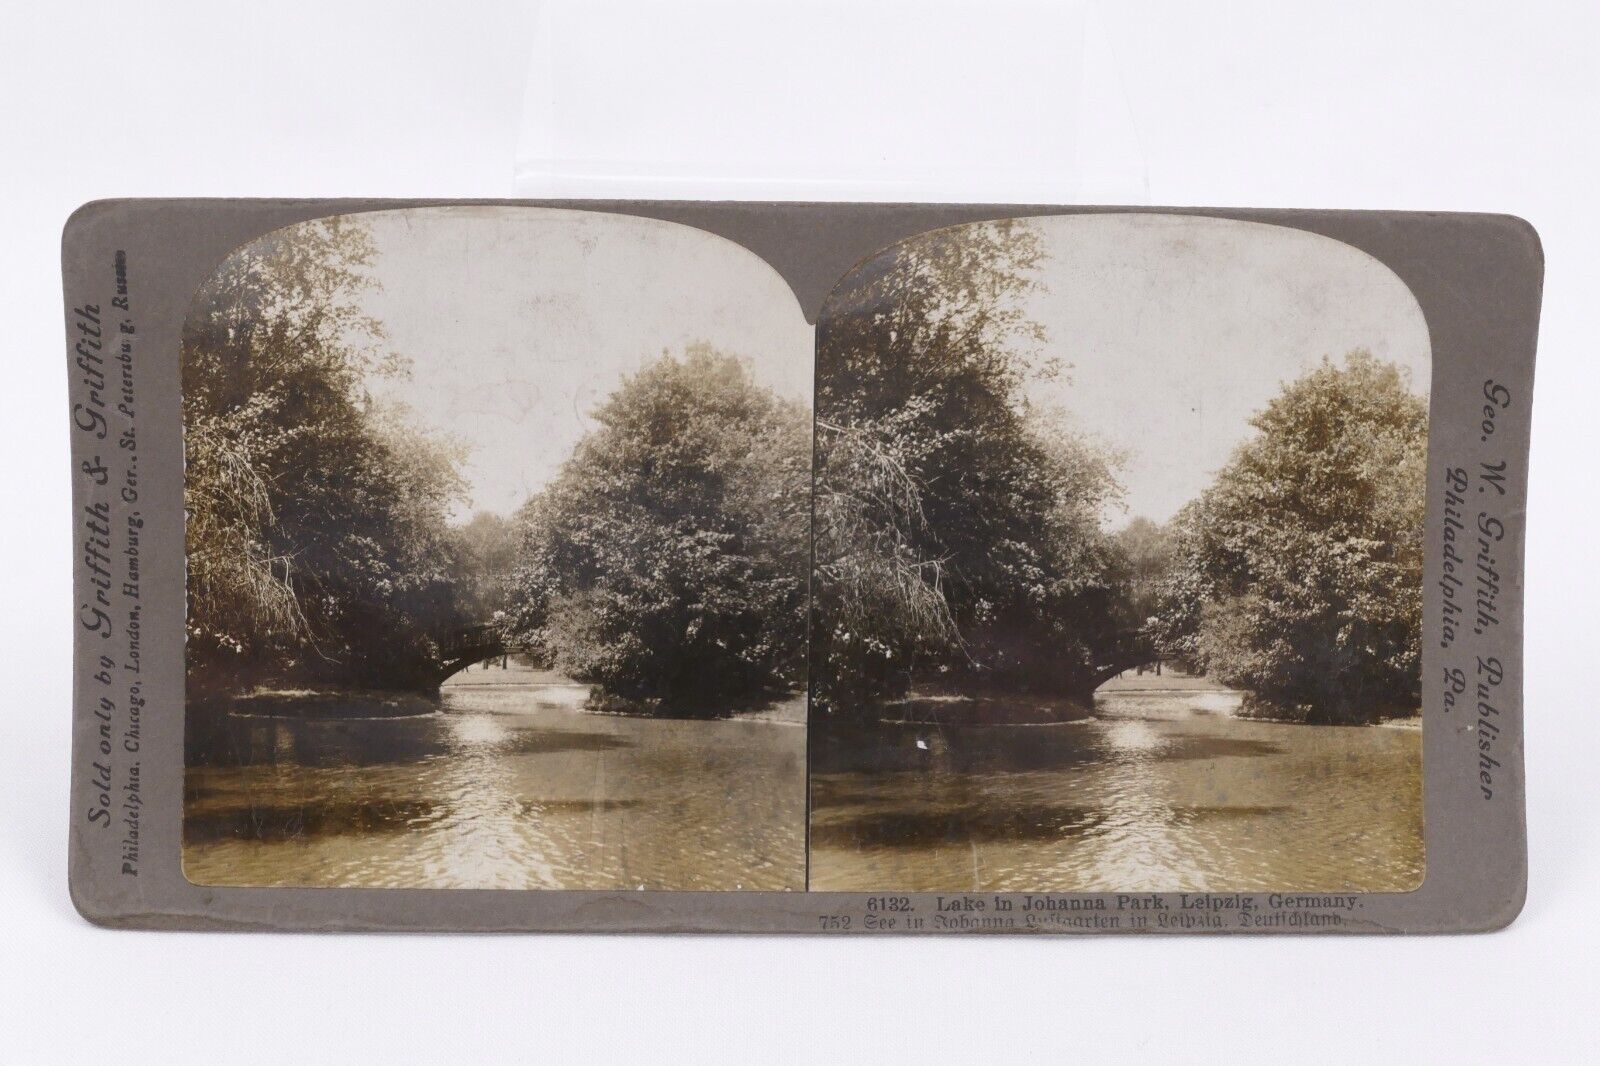 Griffith Stereoview Lake in Johanna Park, Leipzig, Germany